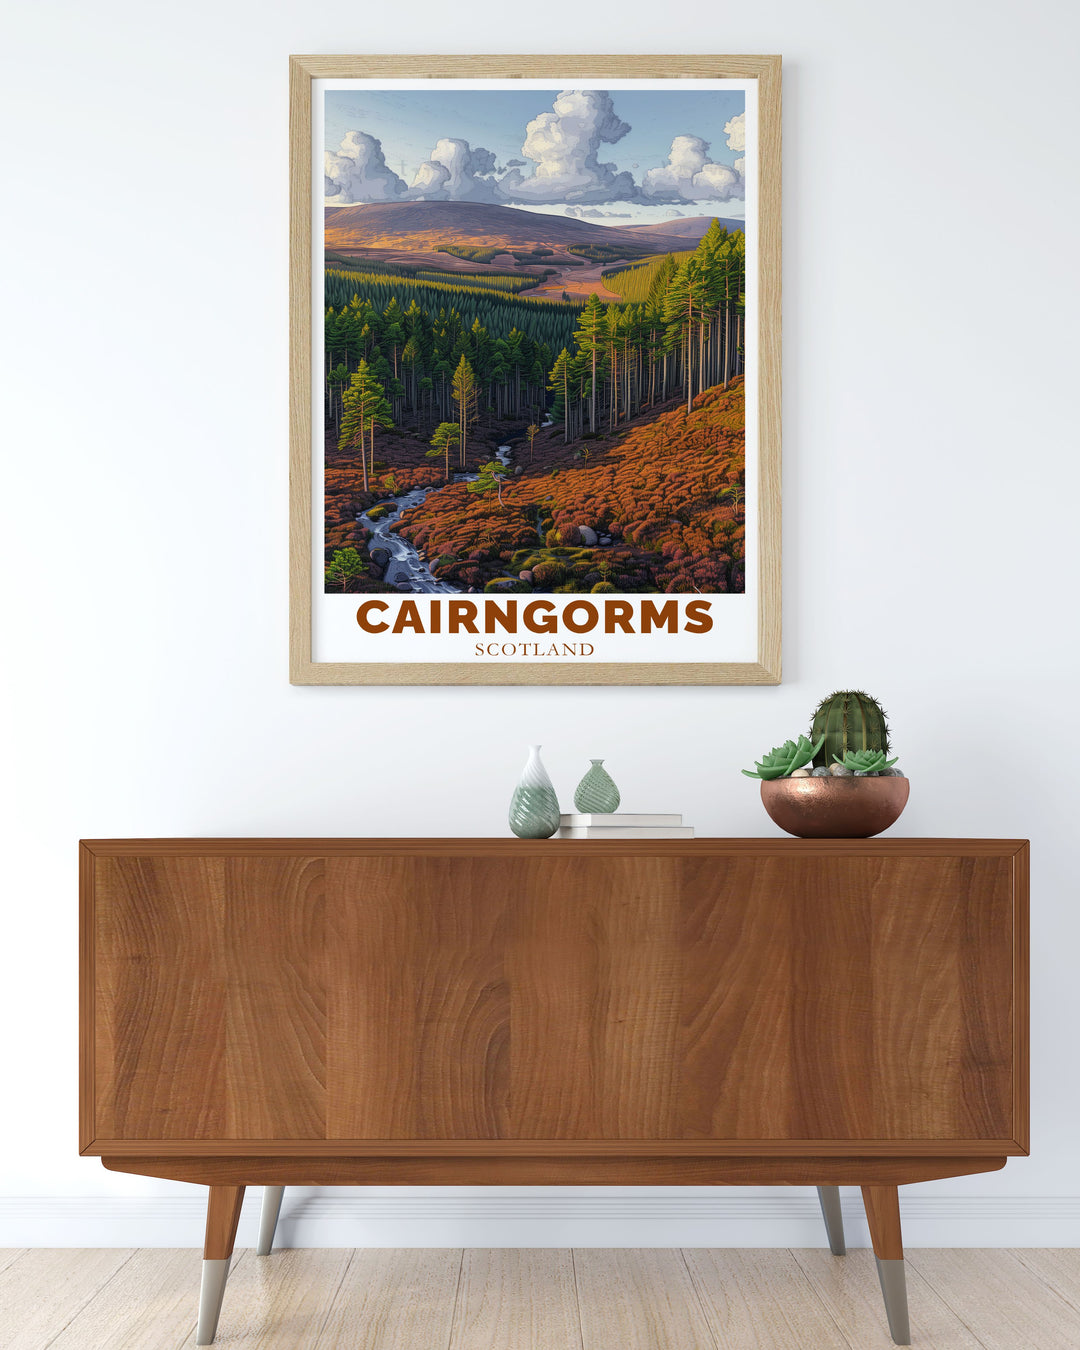 Rothiemurchus Forest prints offering an elegant and contemporary twist on traditional nature illustrations highlighting the majestic scenery of the Scottish Highlands perfect for nature lovers and art enthusiasts